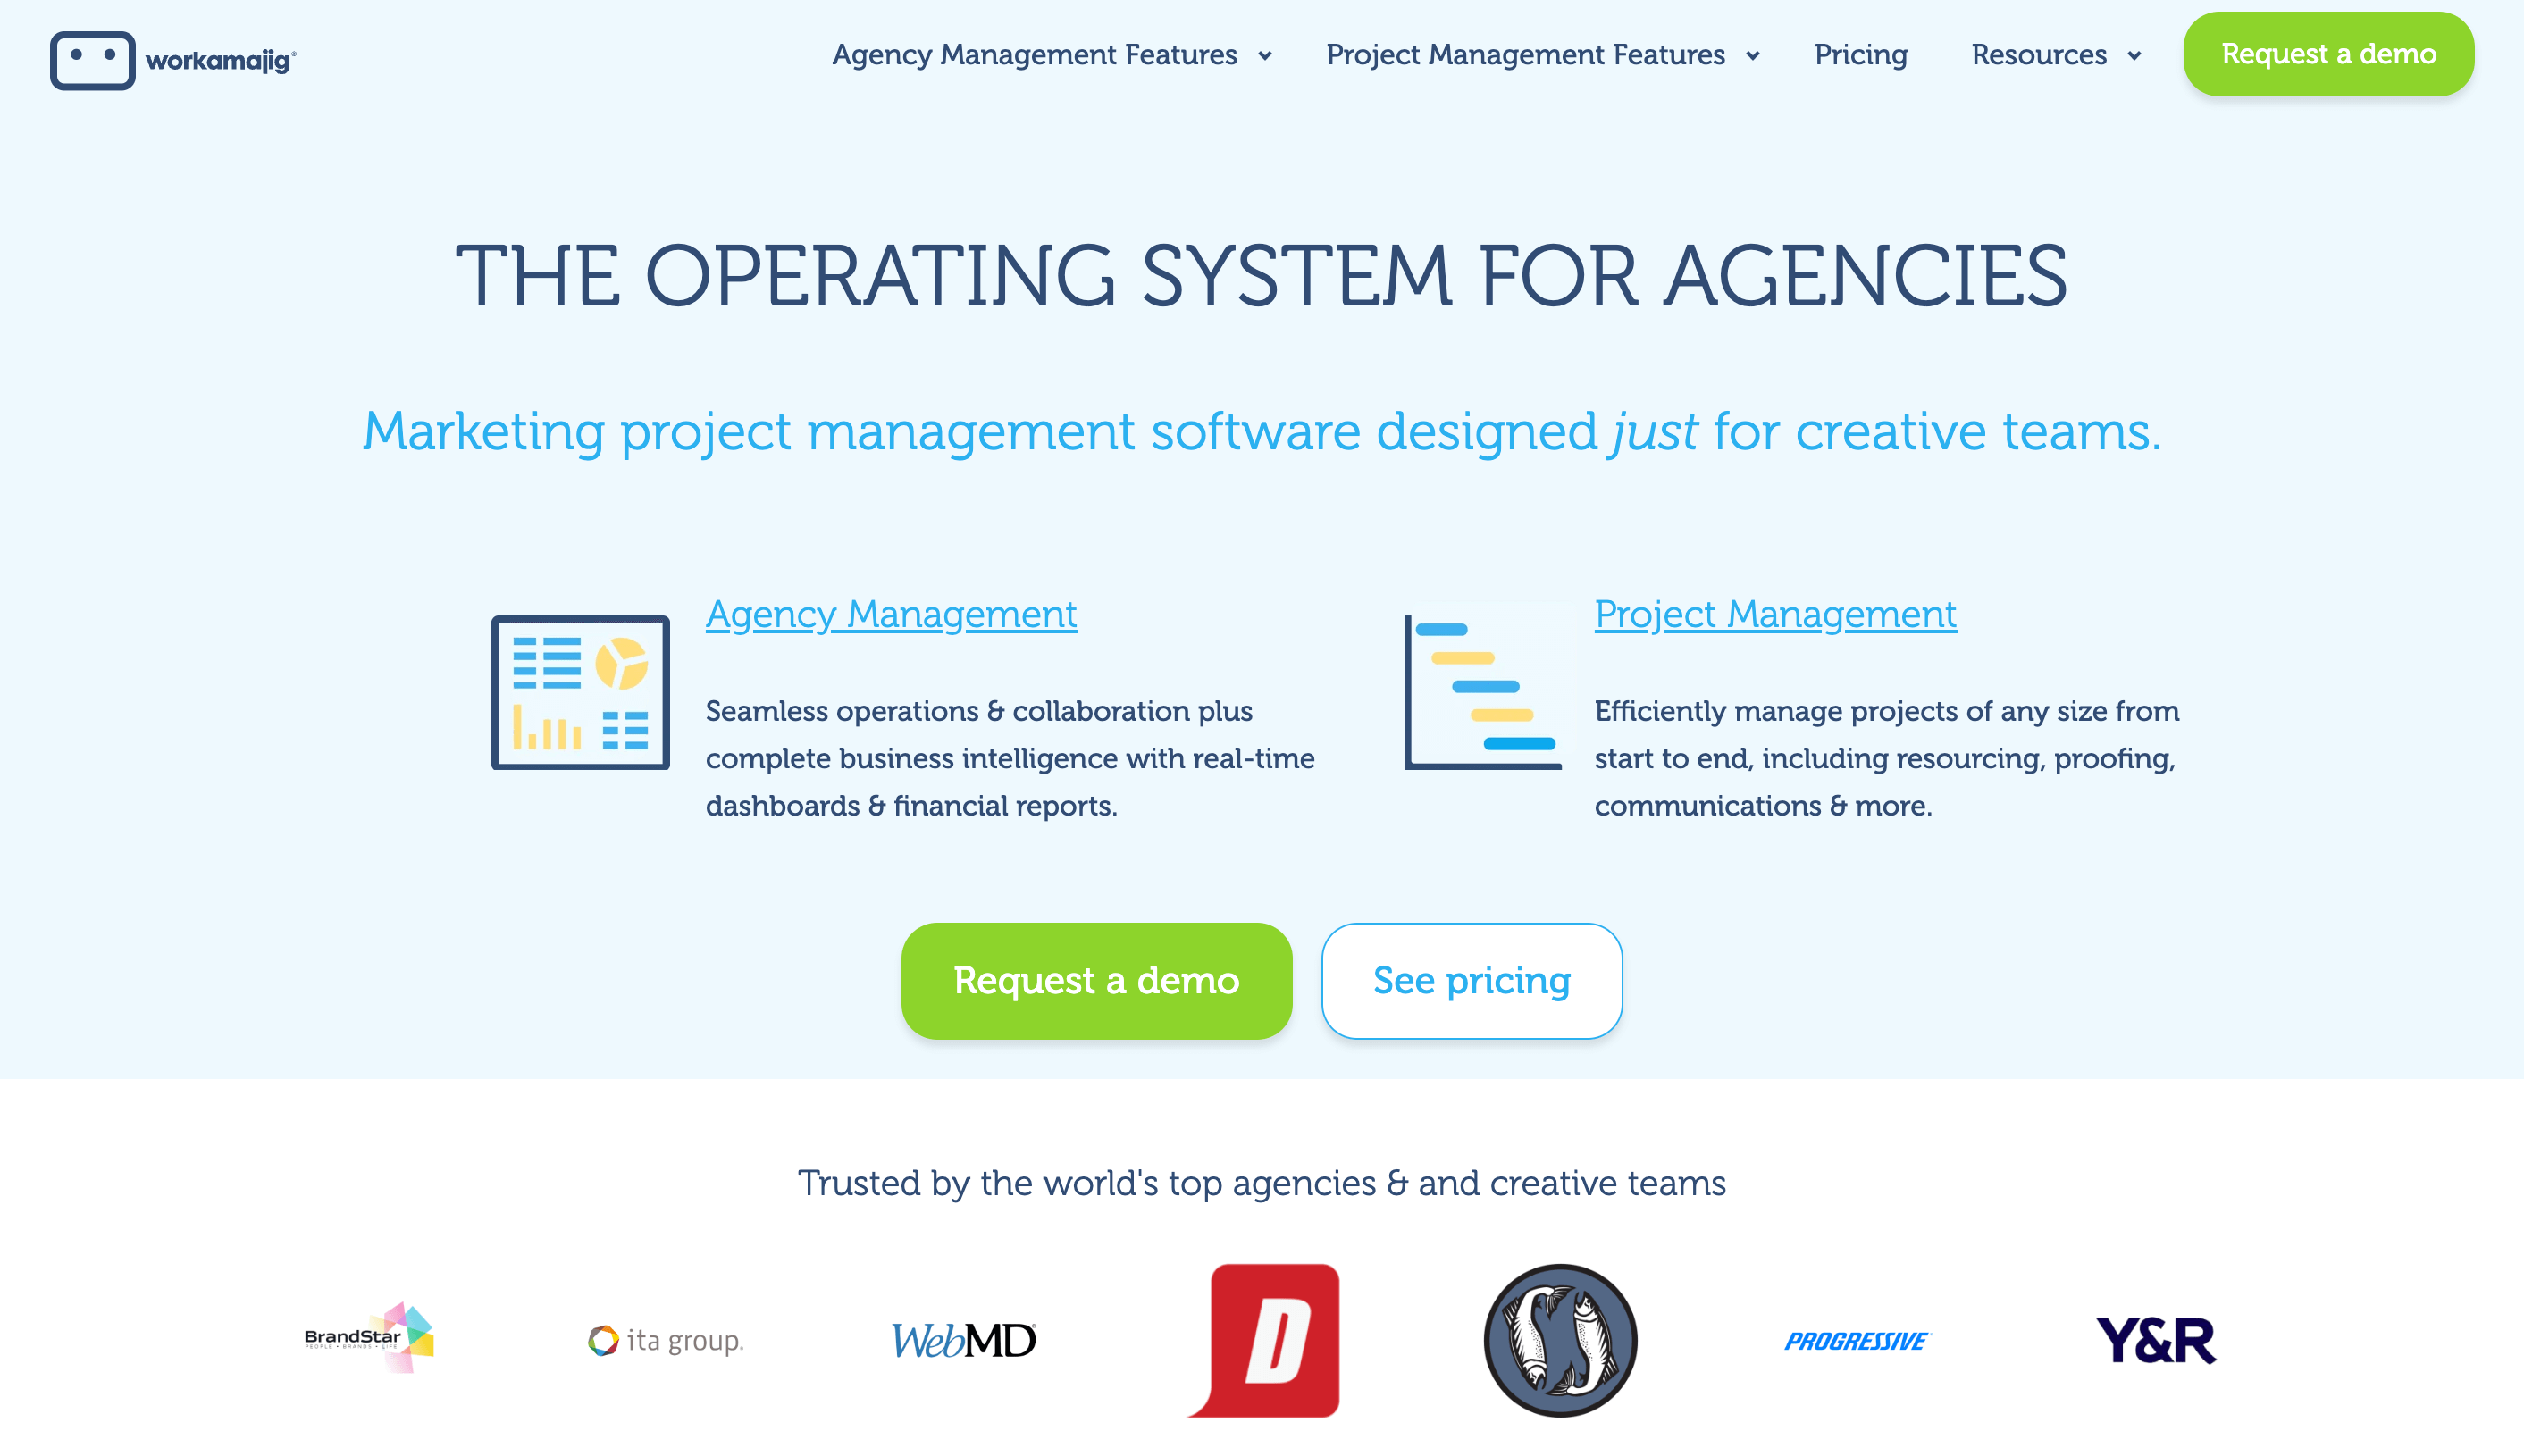 Workamajig homepage: The Operating System for Agencies